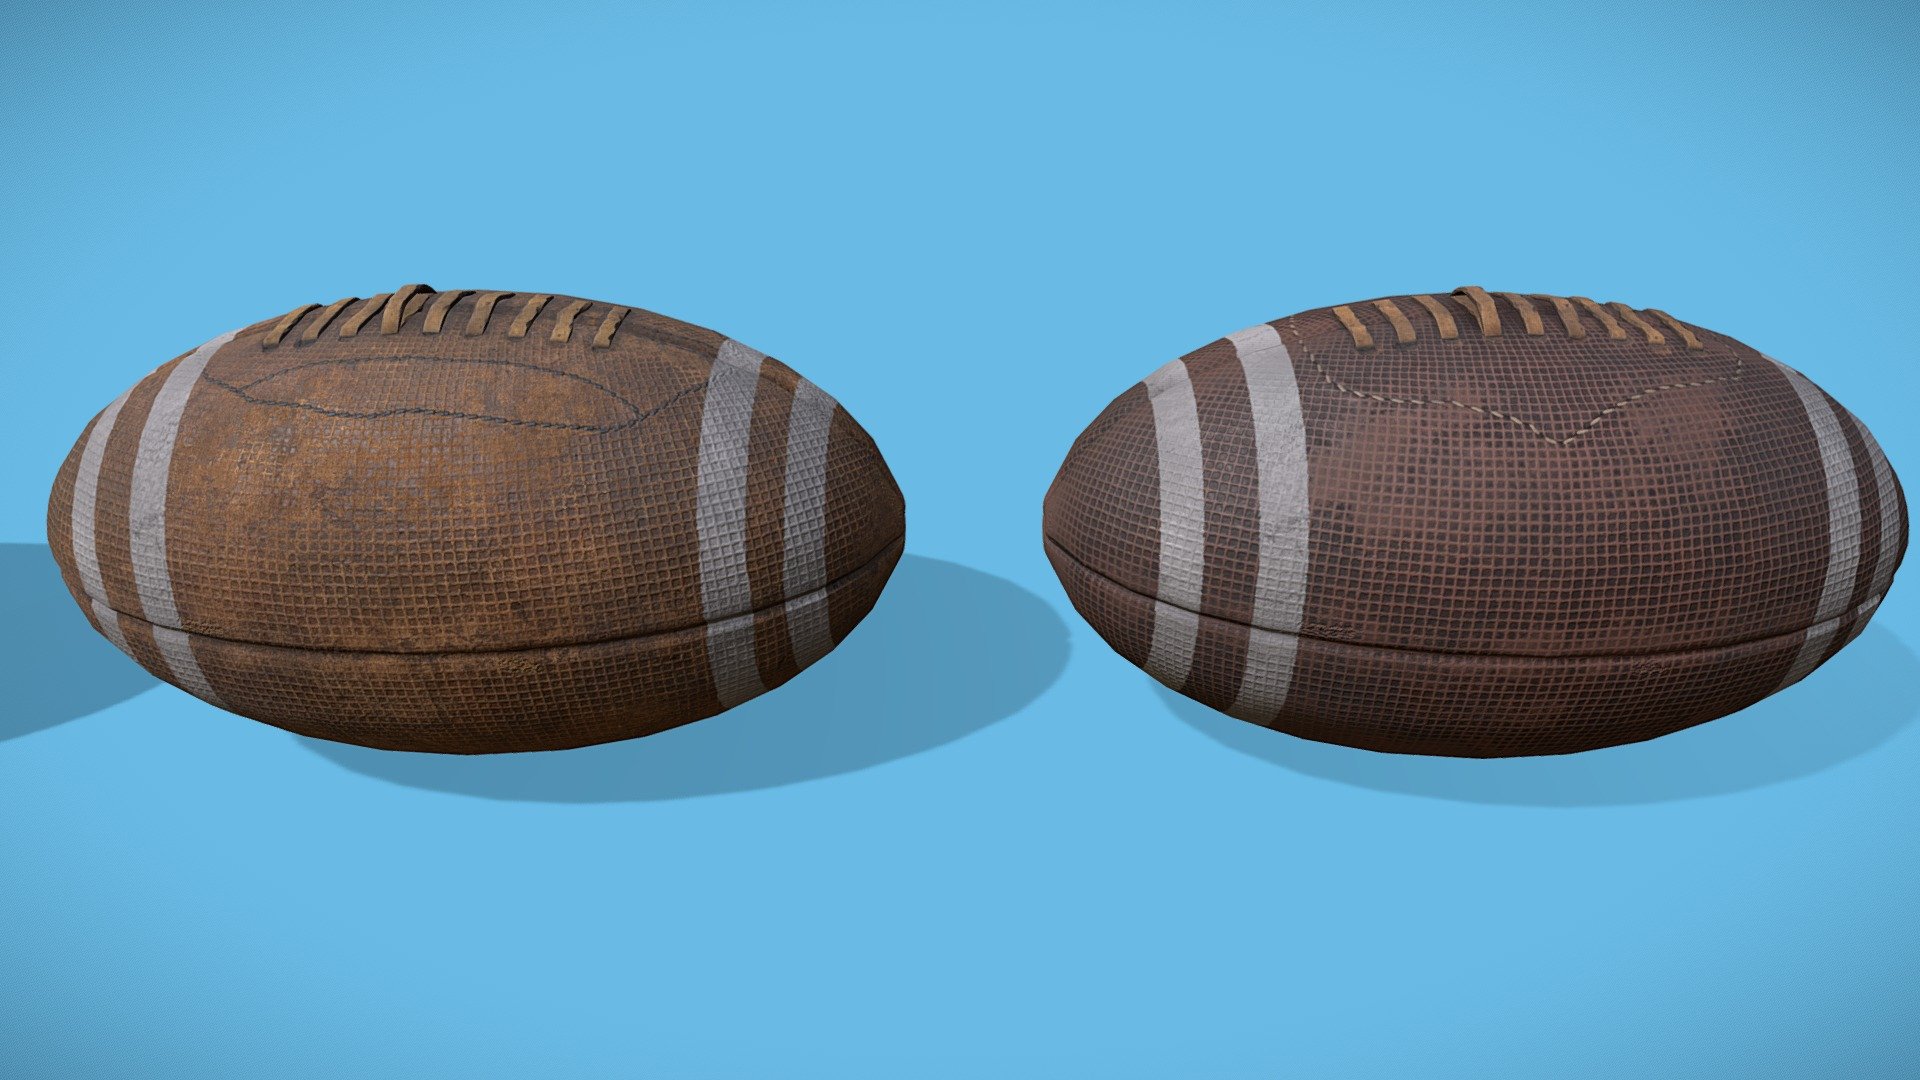 Late 1920s or 1930s old-fashioned American-style Footballs in several different texture variations, and one model variation 3d model